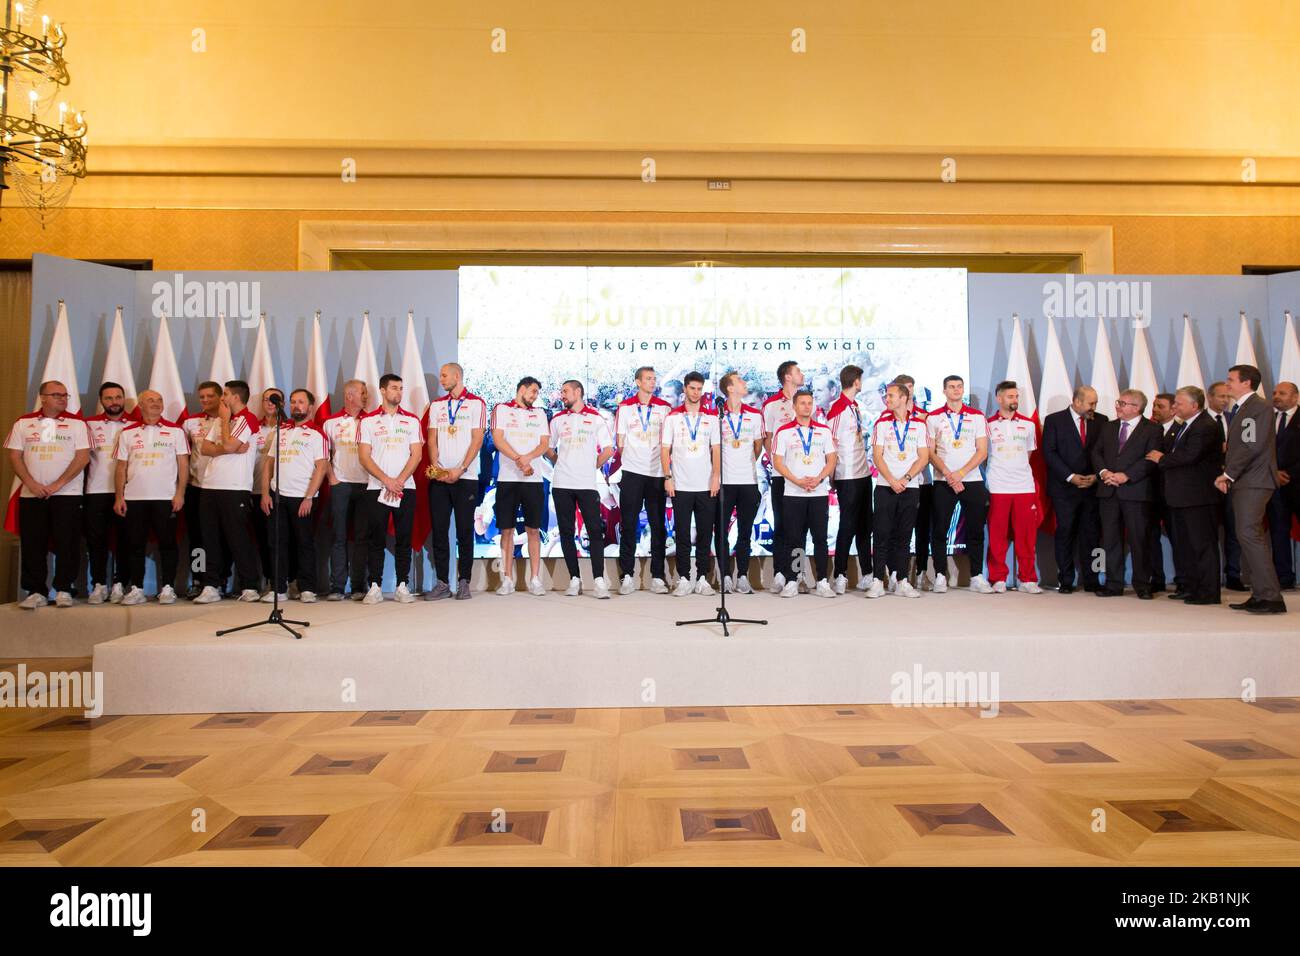 Poland men's national volleyball team during the meeting with Prime Minister of Poland Mateusz Morawiecki at Chancellery of the Prime Minister in Warsaw, Poland on 1 October 2018. Poland won the gold medal after defeating Brazil in FIVB Volleyball Men's World Championship Final in Turin on 30 September. (Photo by Mateusz Wlodarczyk/NurPhoto) Stock Photo